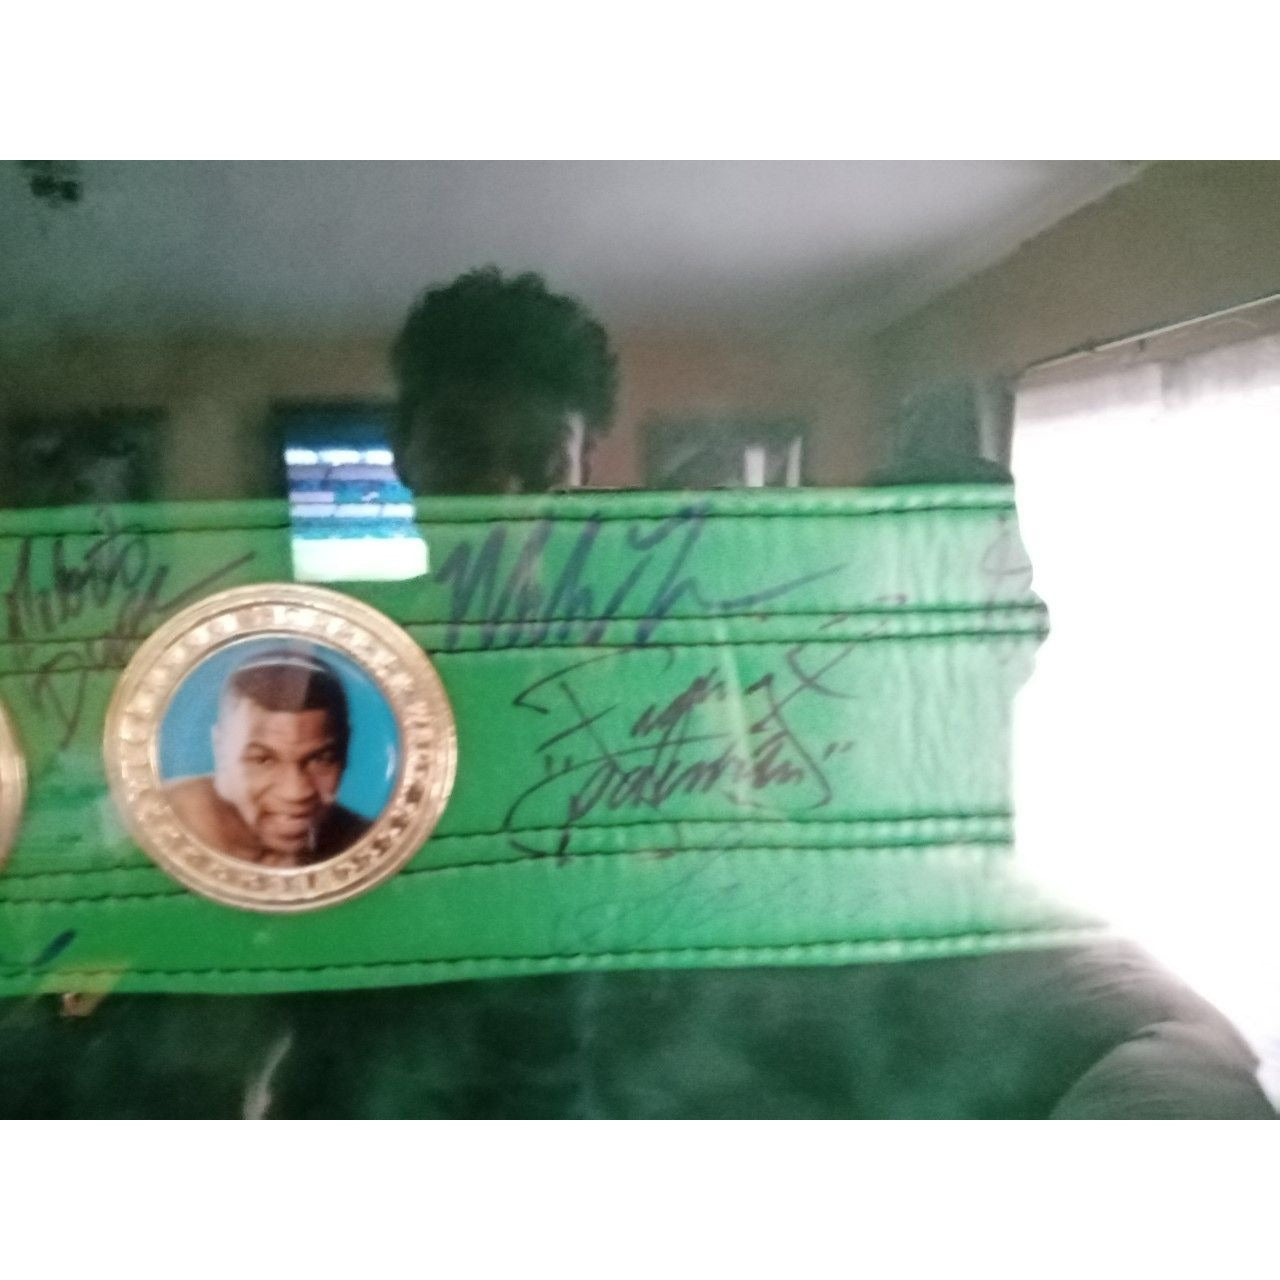 Muhammad Ali Floyd Mayweather Jr Marvin Hagler 25 boxing Legend signed and framed 60x40 authentic belt with proof